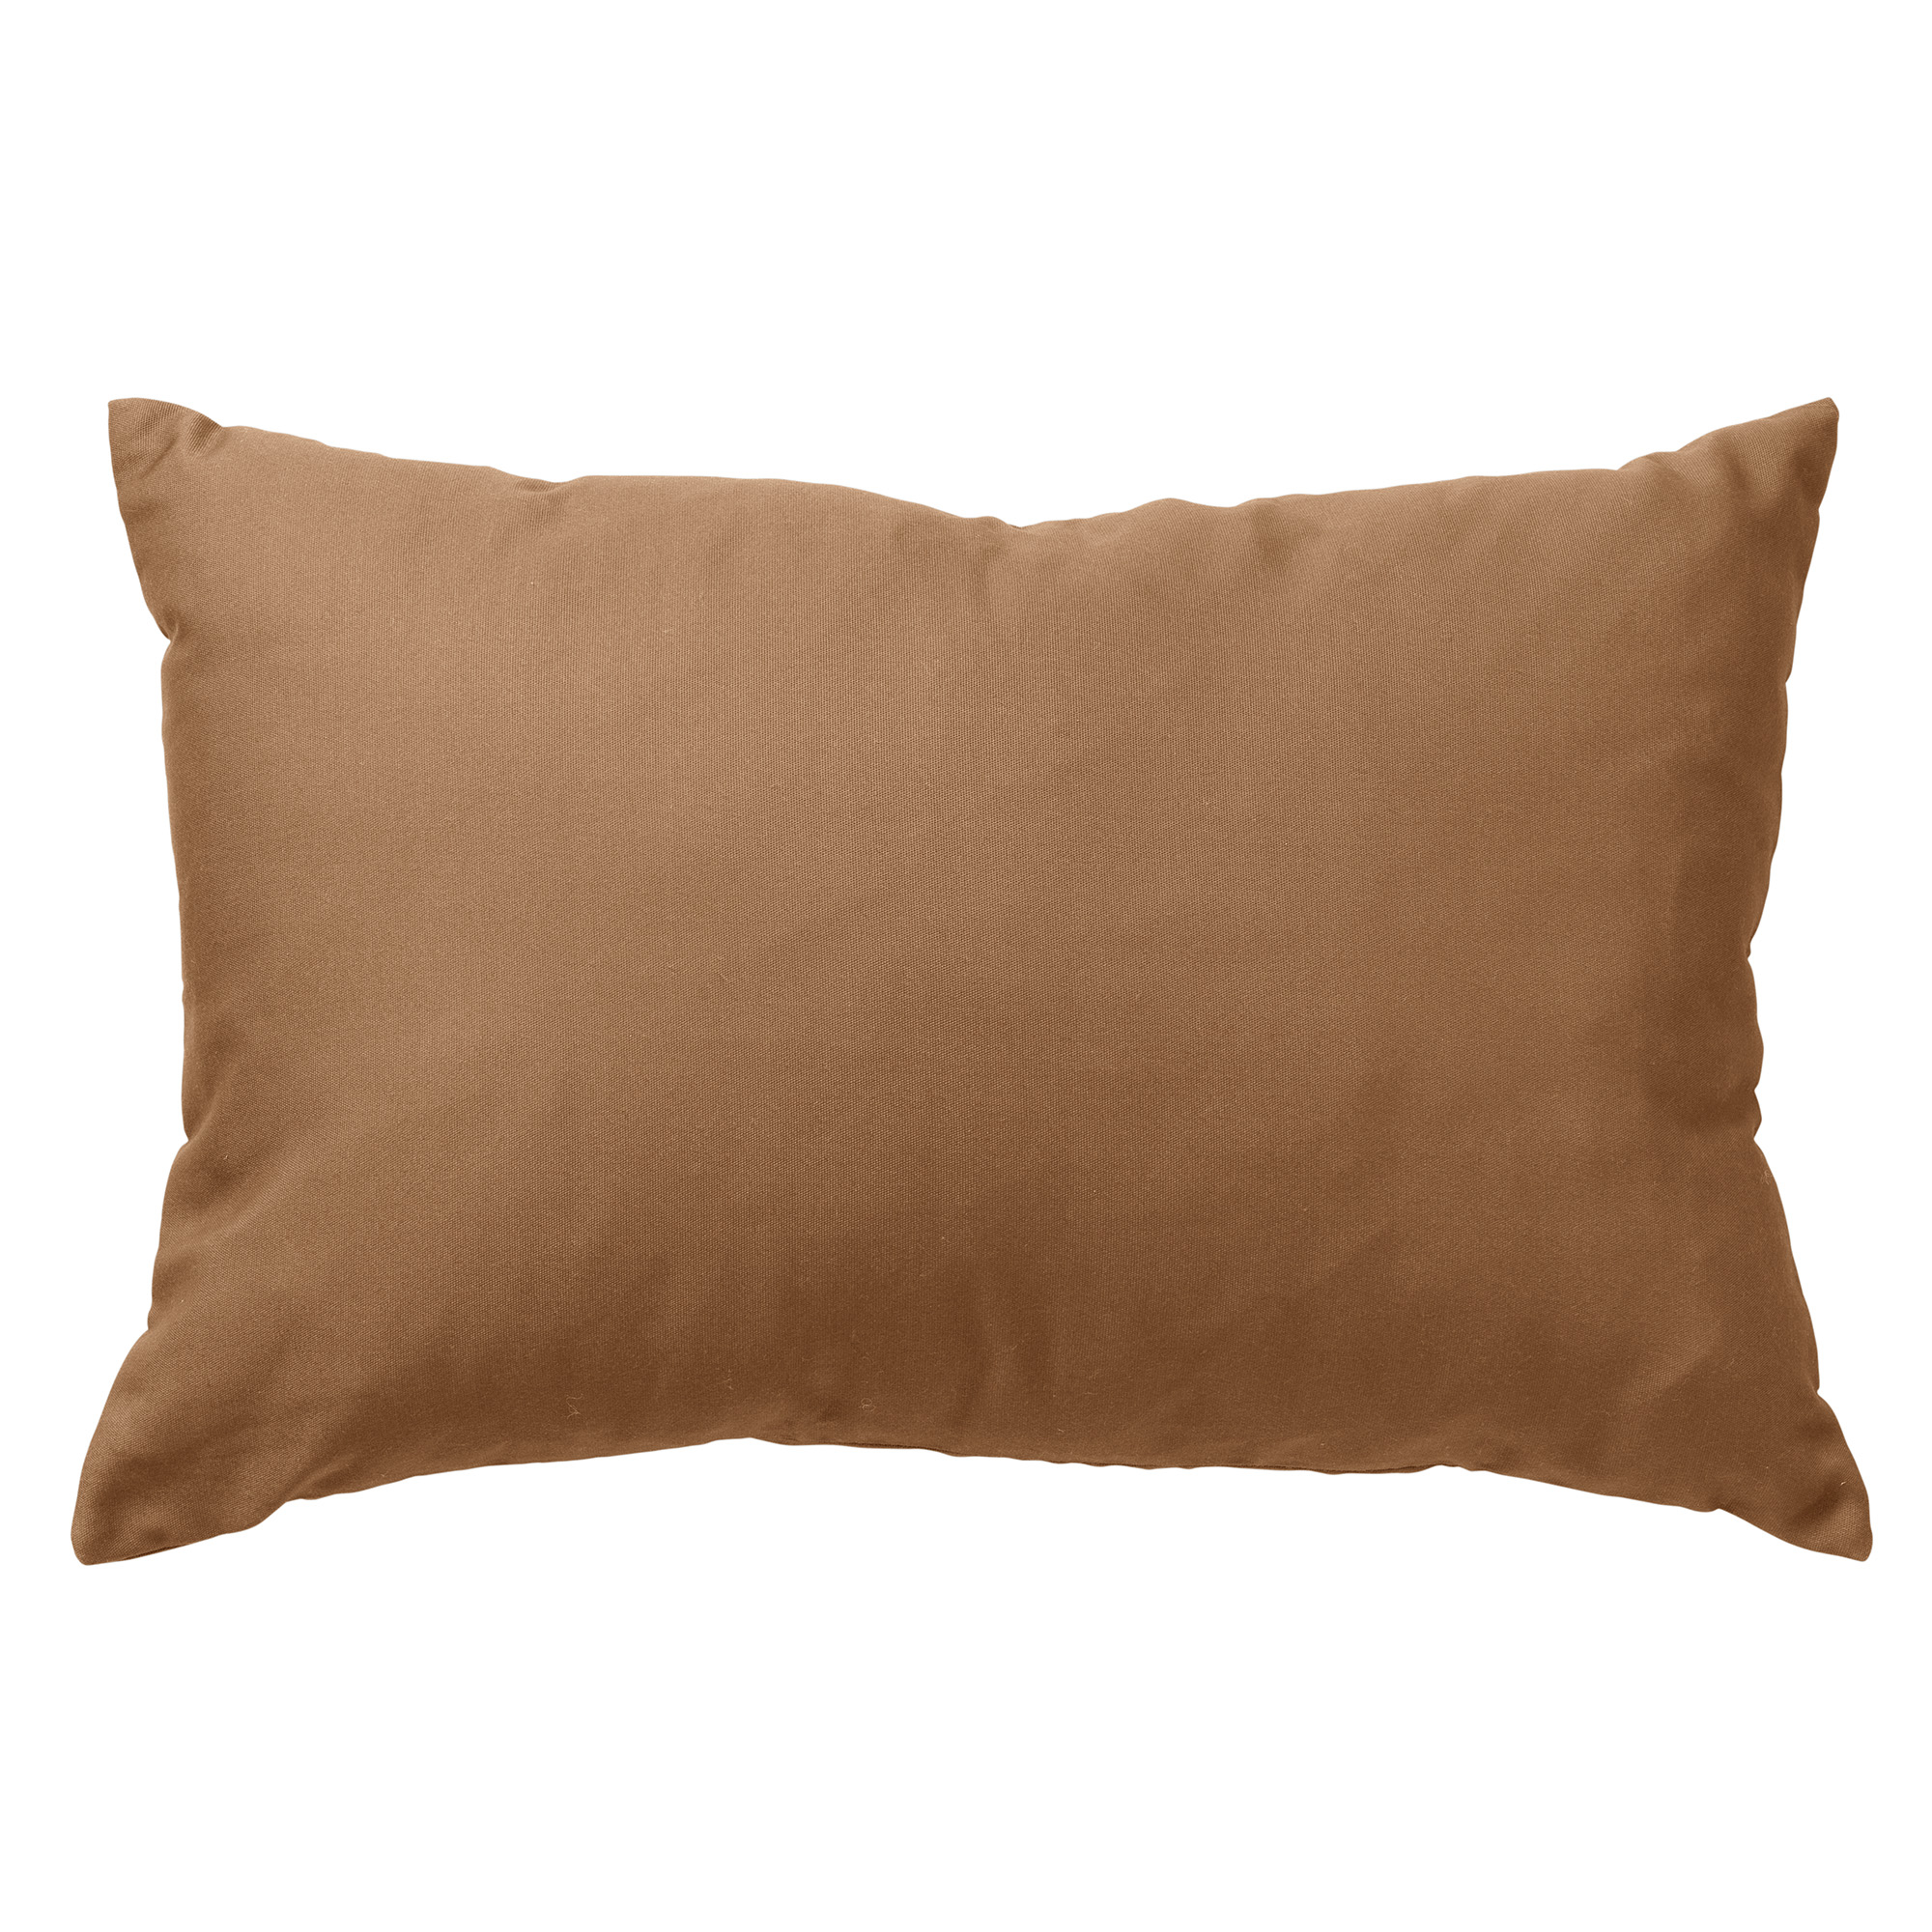 SANTORINI - Cushion 40x60 cm outdoor Tobacco Brown - water-repellent and UV-resistant - brown